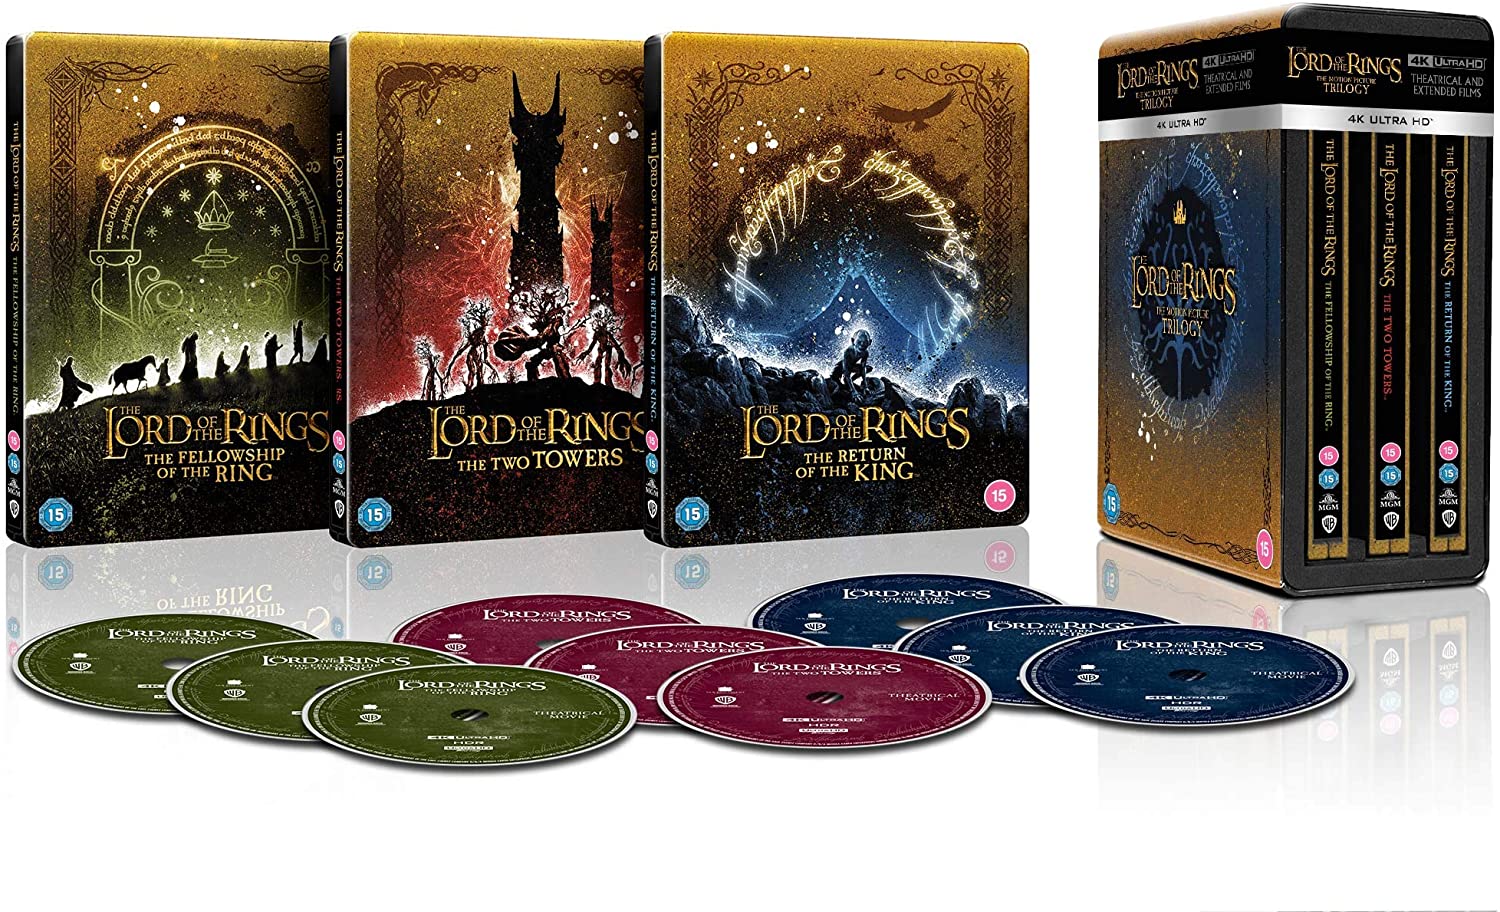 Lord of the Rings Trilogy in Steelbooks